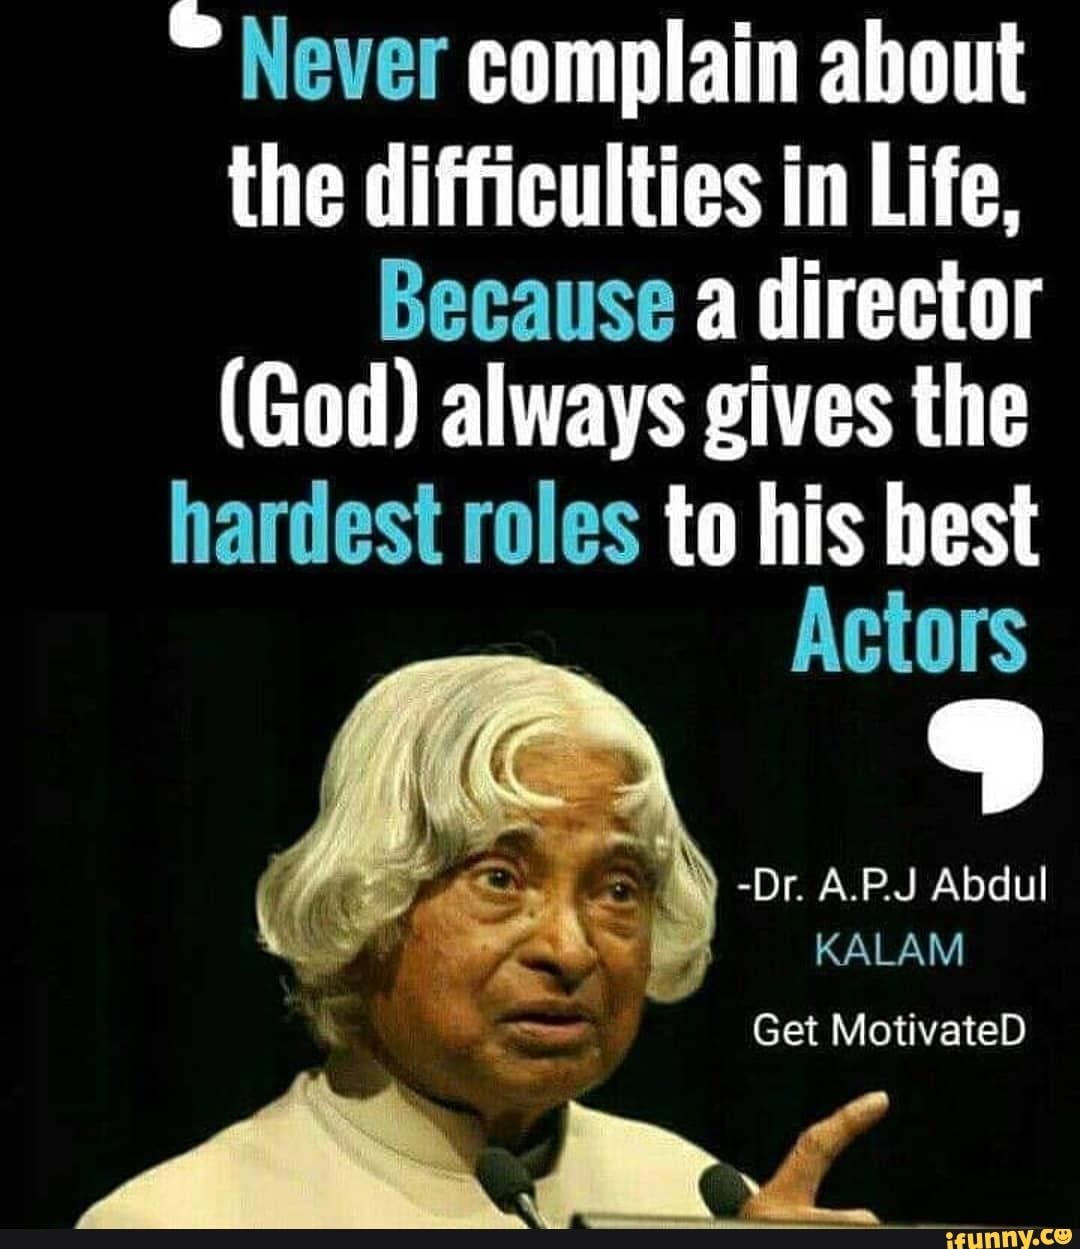 " Never complain about the difﬁculties in life, Because a director (God) always gives the hardest roles to his best Actors - iFunny